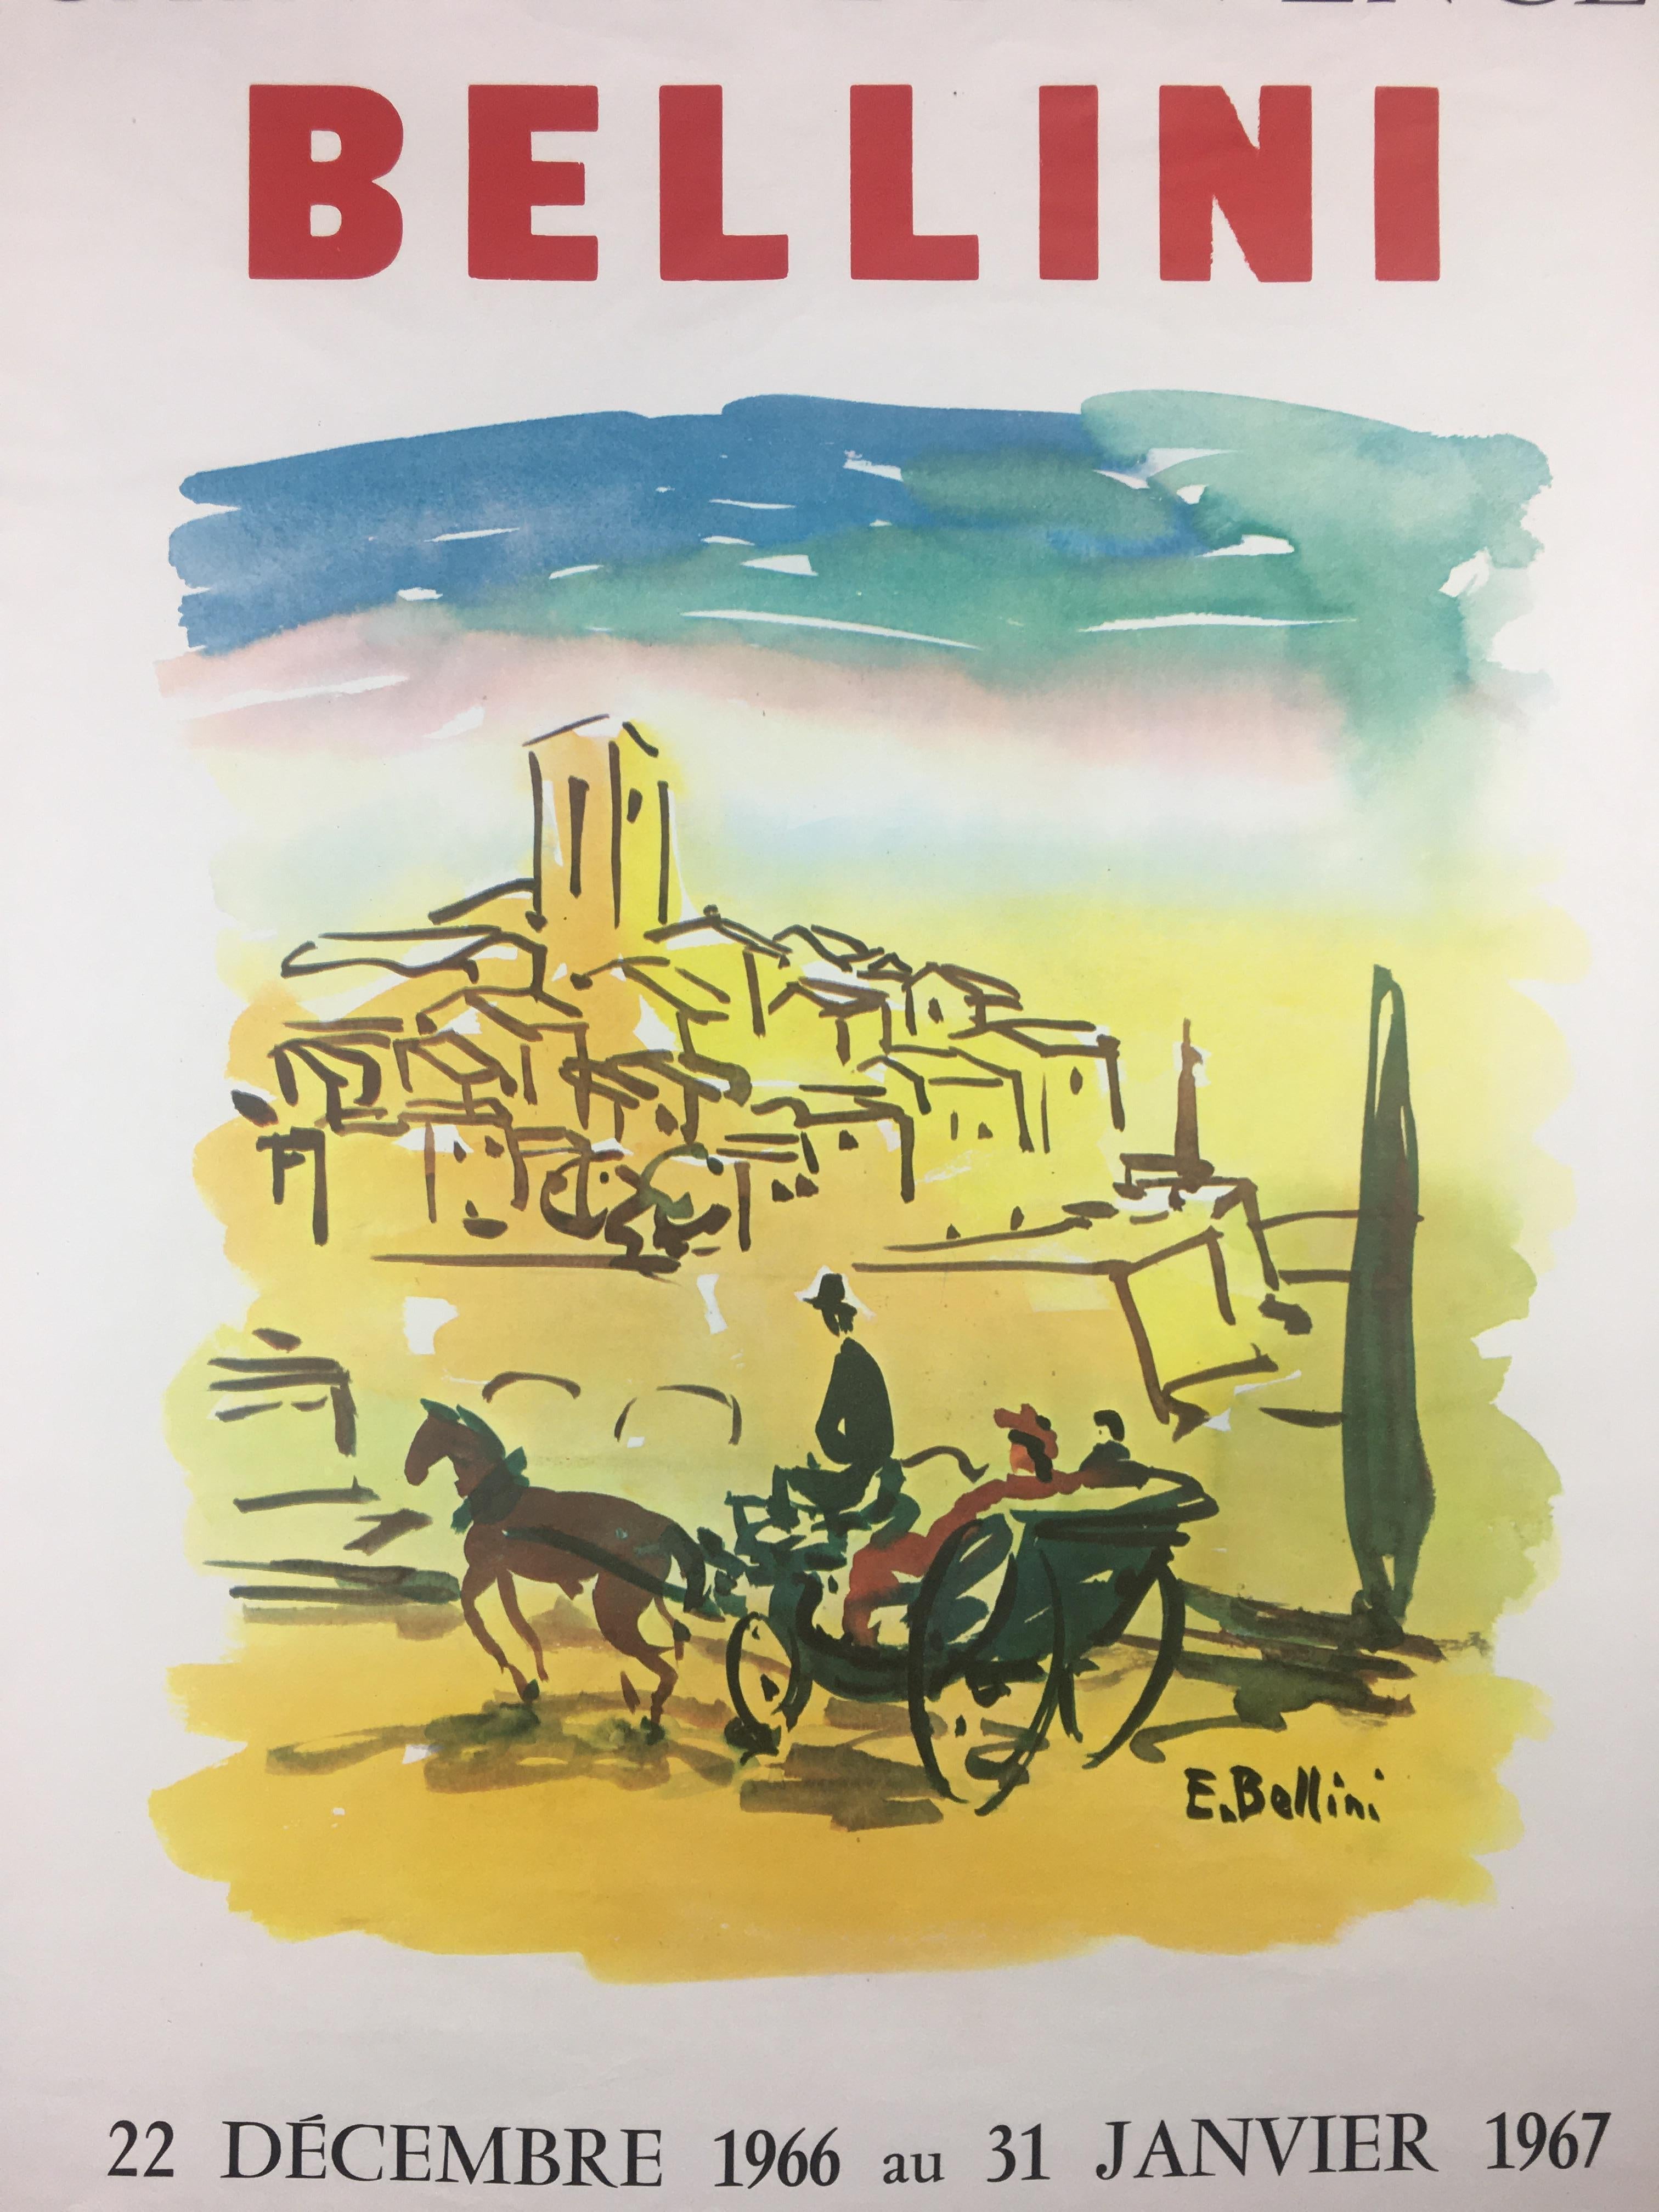 Original midcentury landscape art exhibition poster from the 1967 printed by Devayes in Cannes. 
Depicts the hillside of St. Paul de Vence, France as interrupted by the artist, Bellini. 

This is an original not a reprint with vivid colors that will